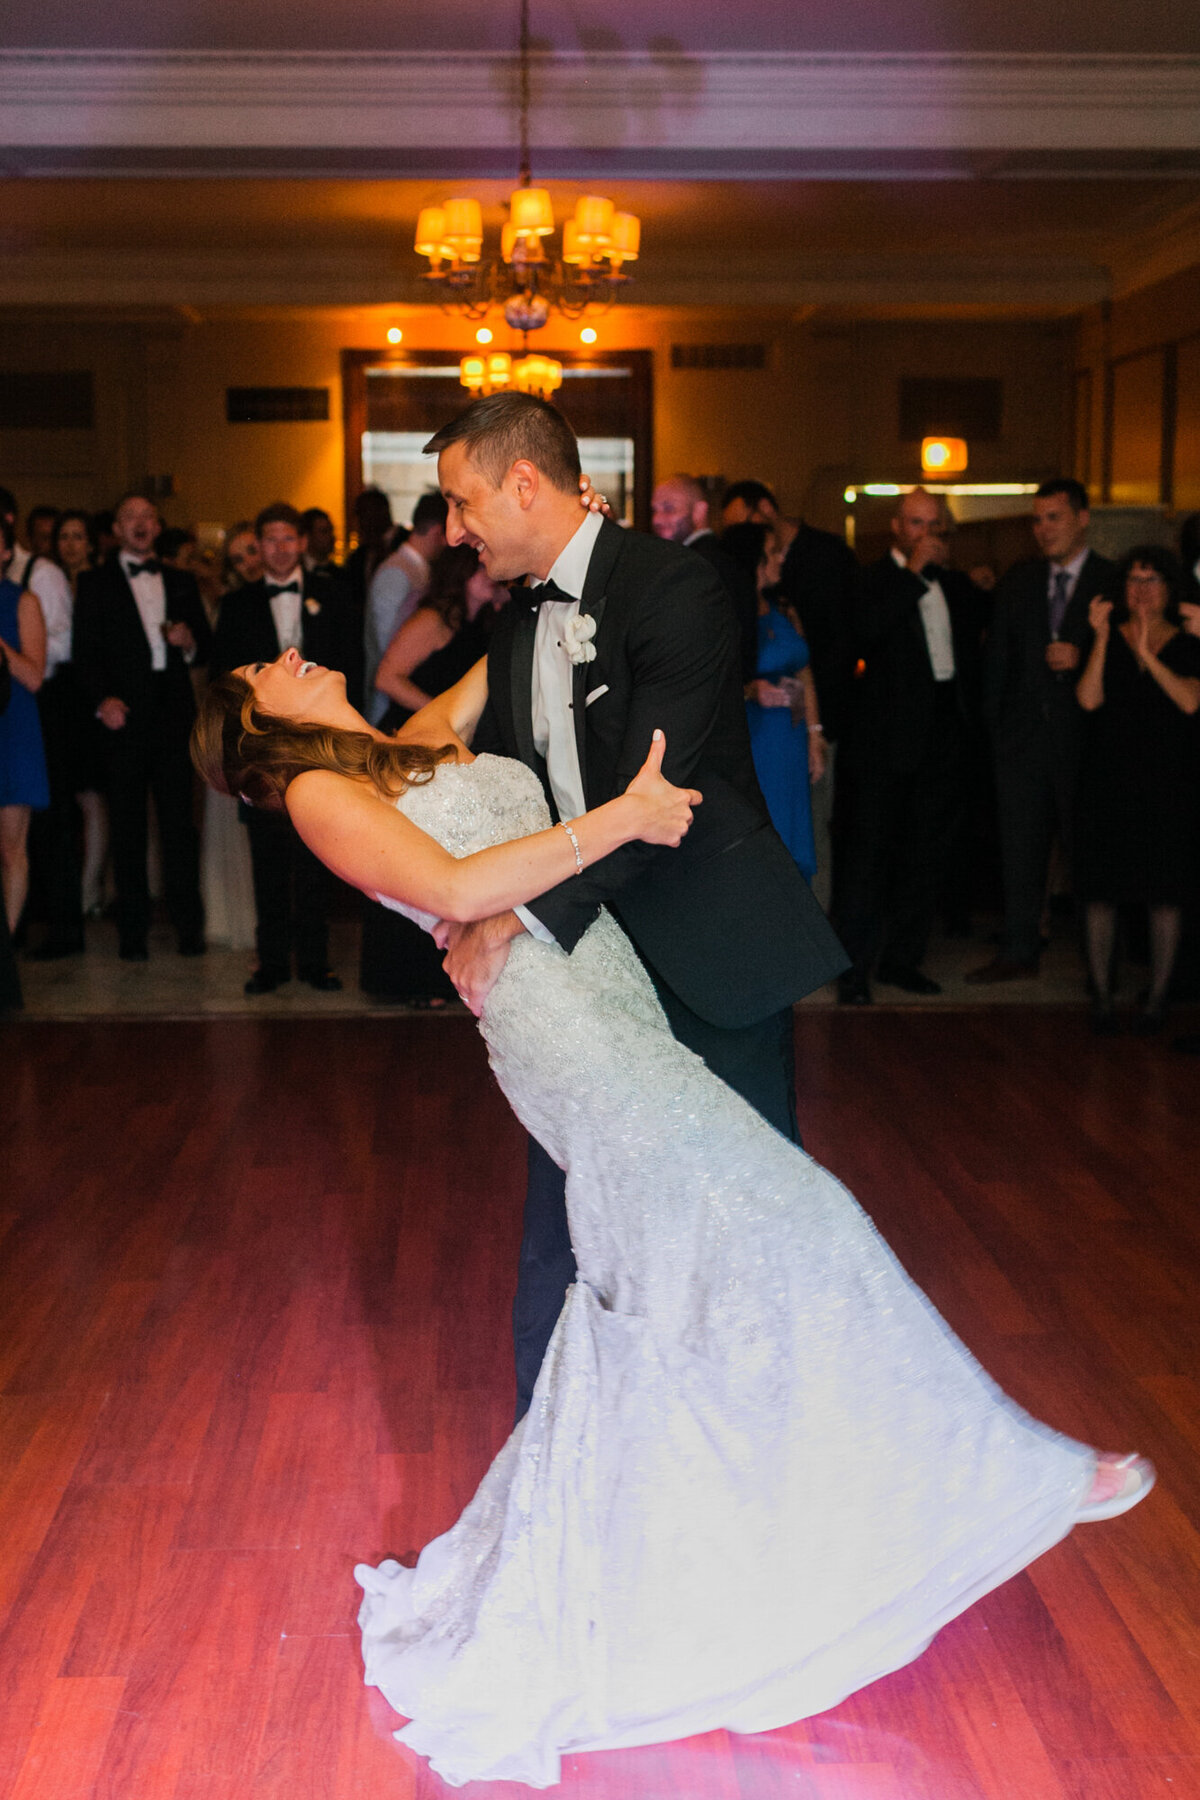 A first dance moment at Salvatore's in Chicago